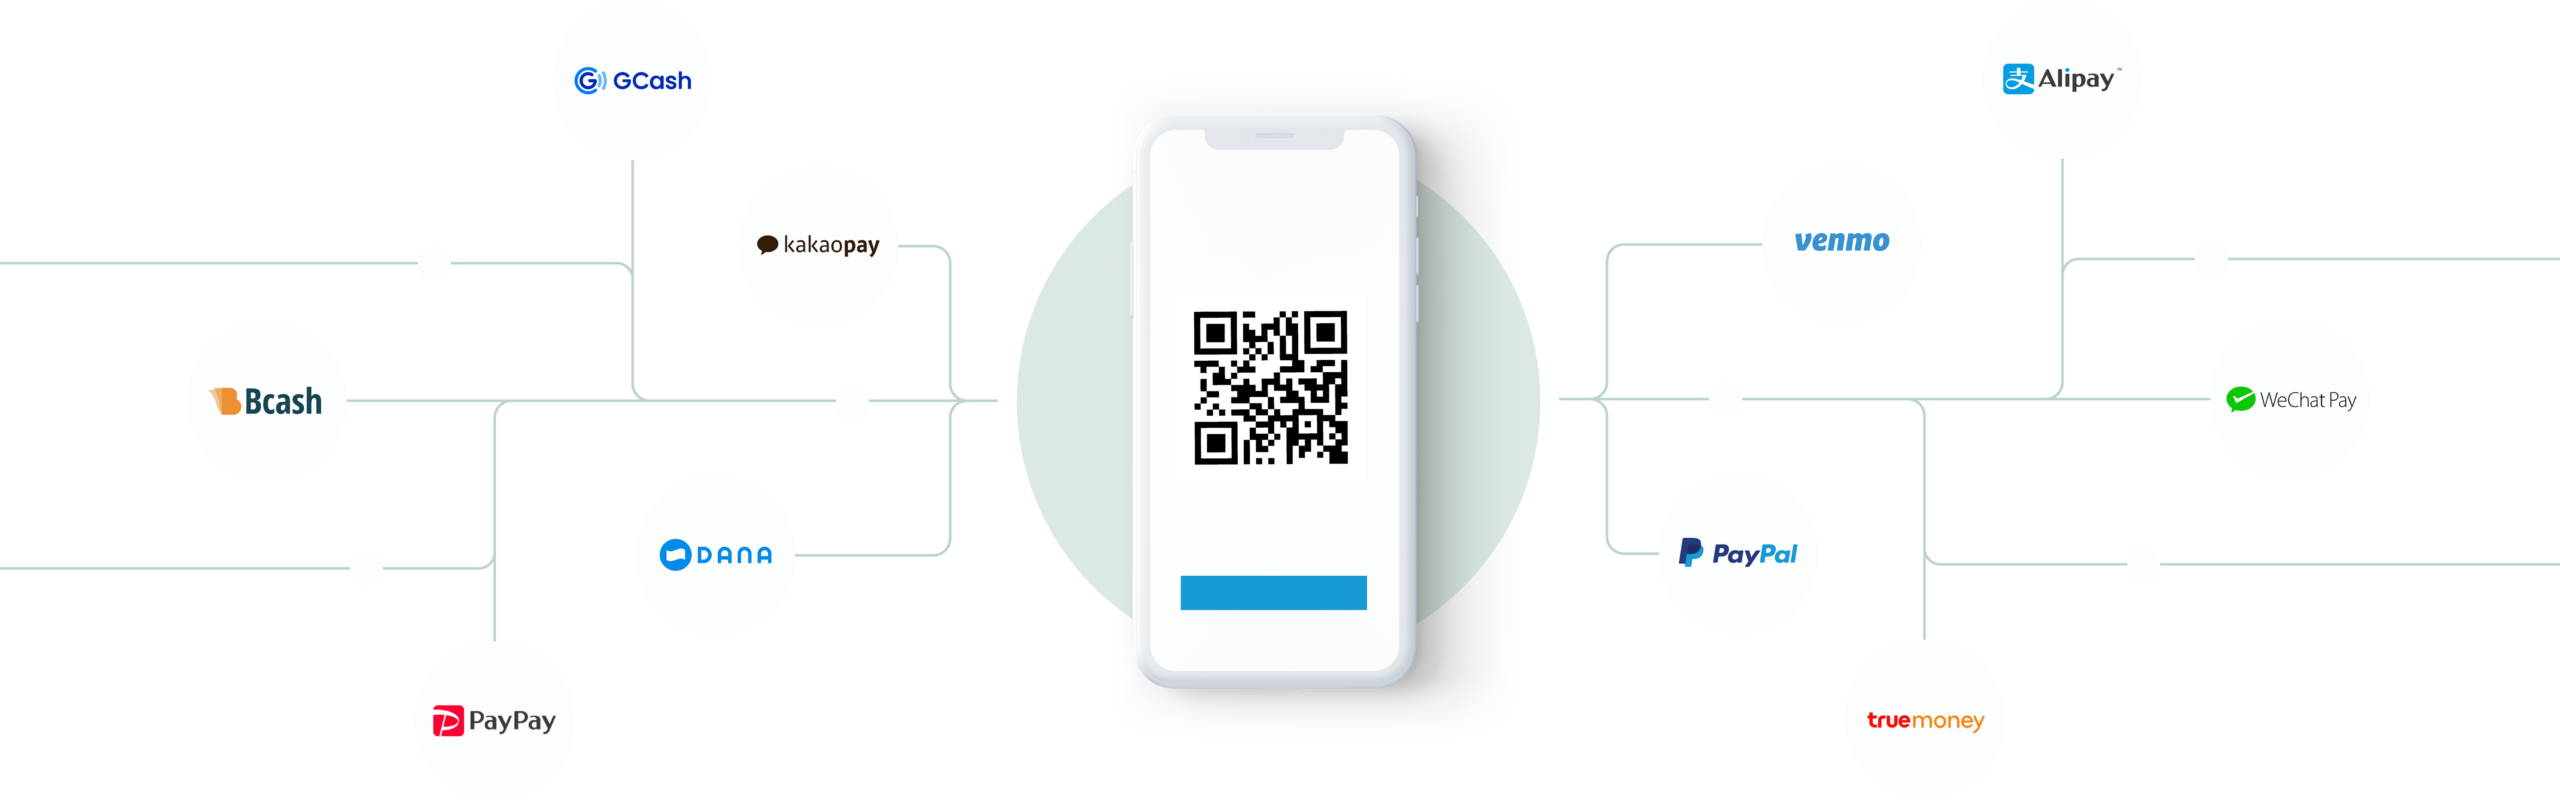 QR-Code Payments with AliPay, Venmo, and more